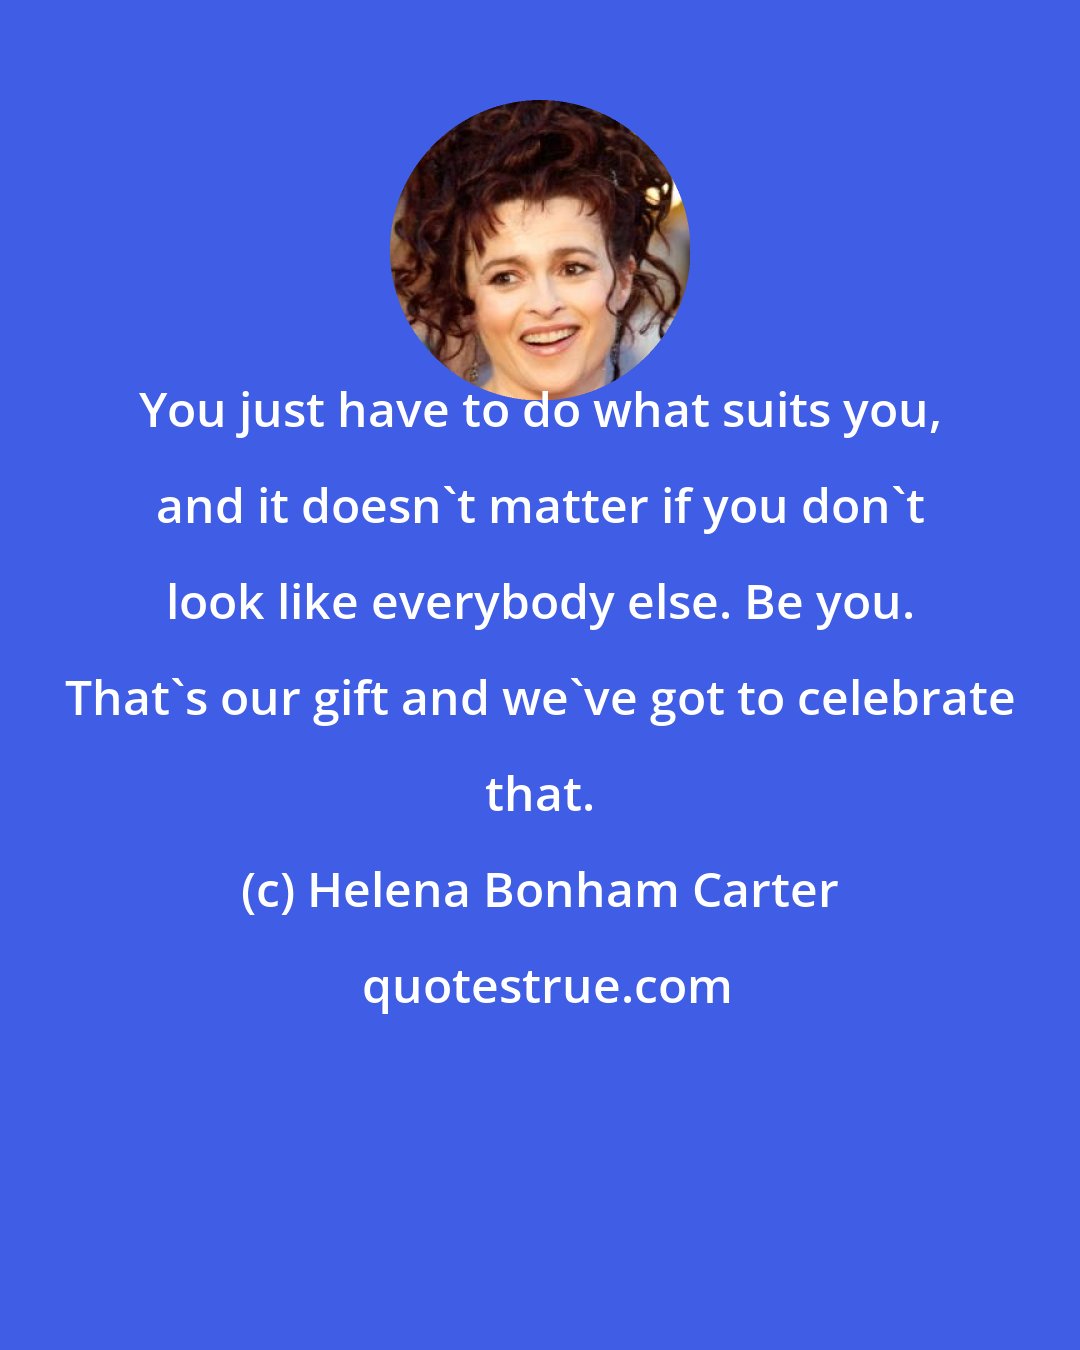 Helena Bonham Carter: You just have to do what suits you, and it doesn't matter if you don't look like everybody else. Be you. That's our gift and we've got to celebrate that.